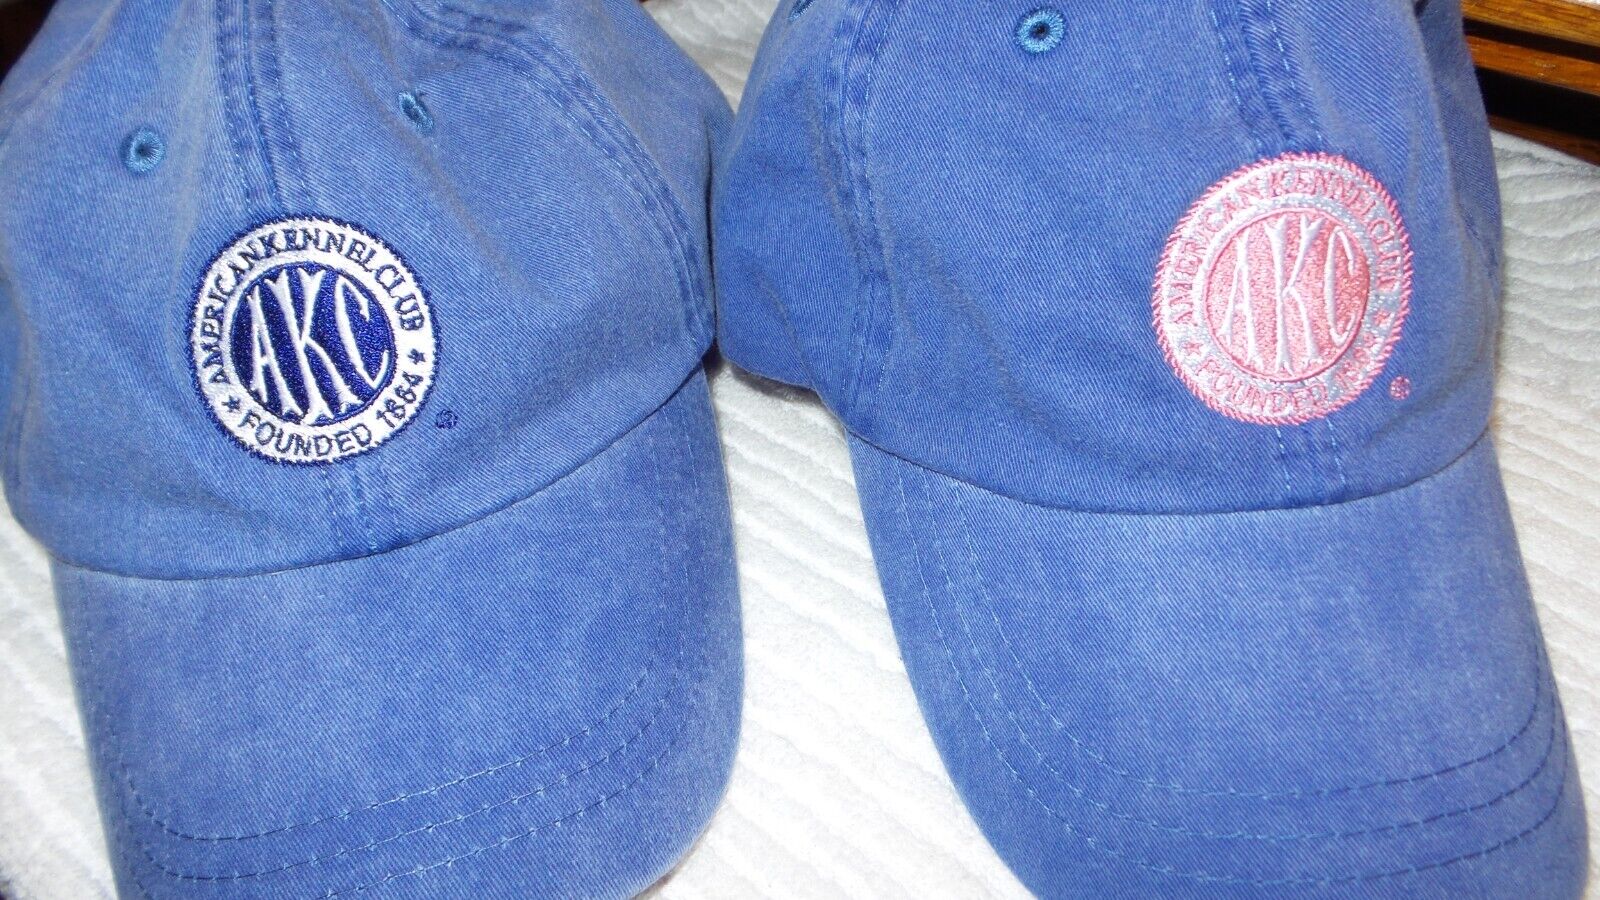 2 AKC AMERICAN KENNEL CLUB HATS BOTH BLUE W/ DIFFERENT COLOR LOGOS 51